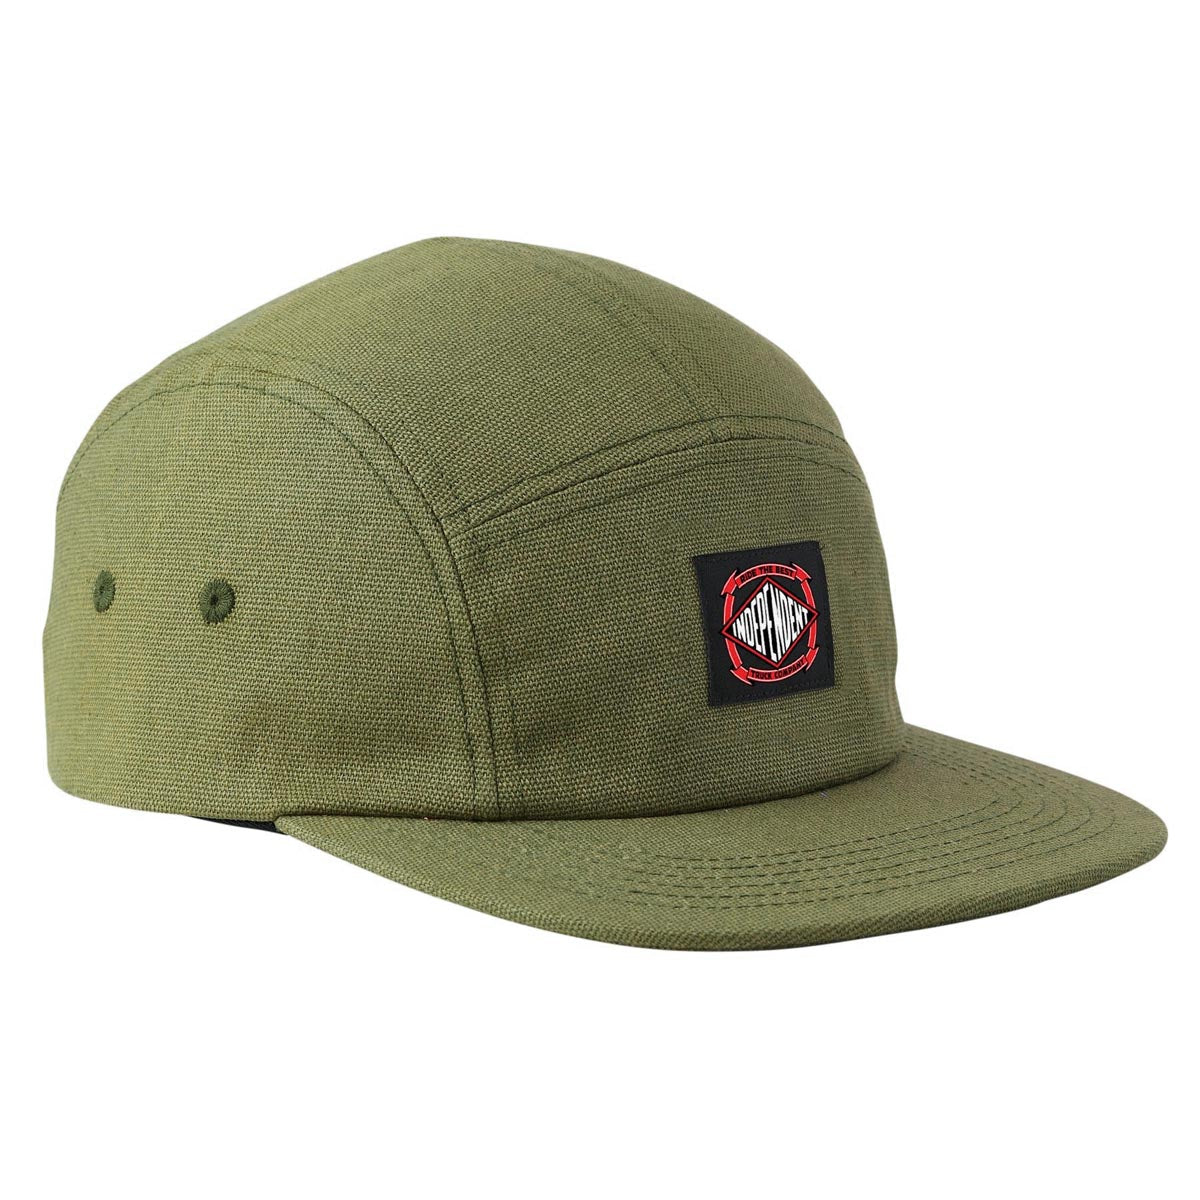 Independent Summit Scroll Camp Unstructured Hat - Army Green image 3